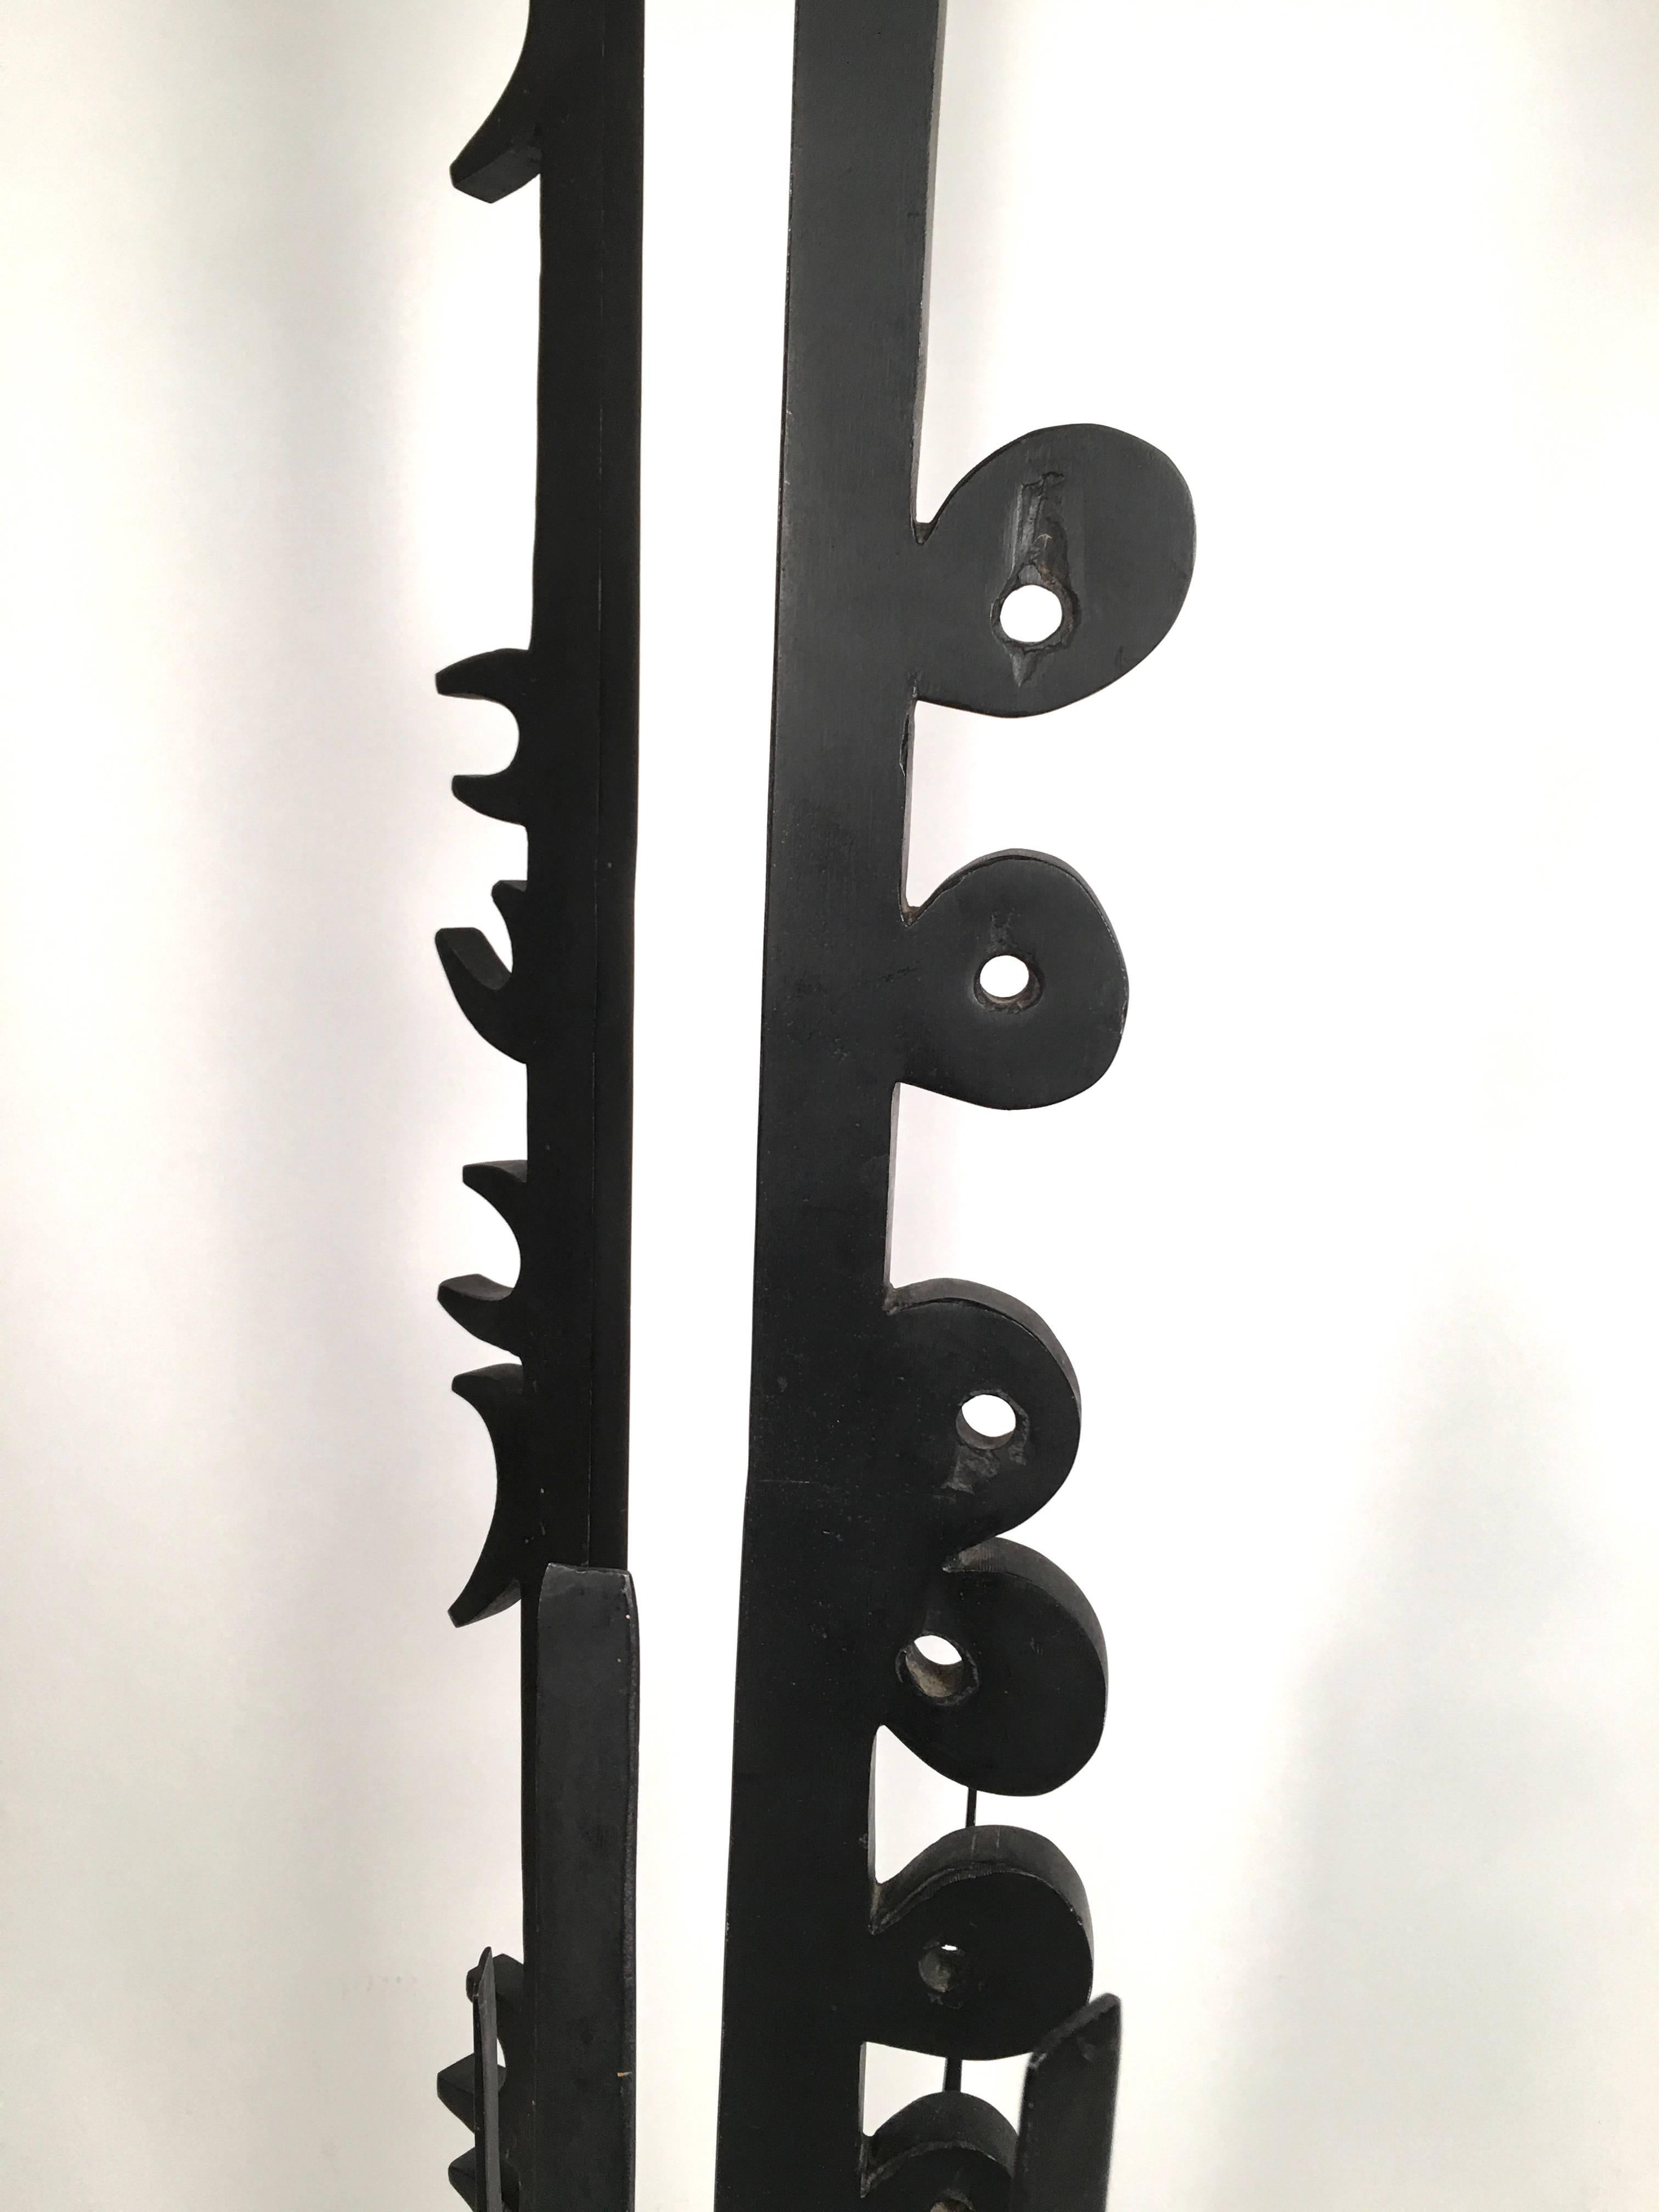 American Mid-Century Modern Metal Sculpture in the manner of Louise Nevelson